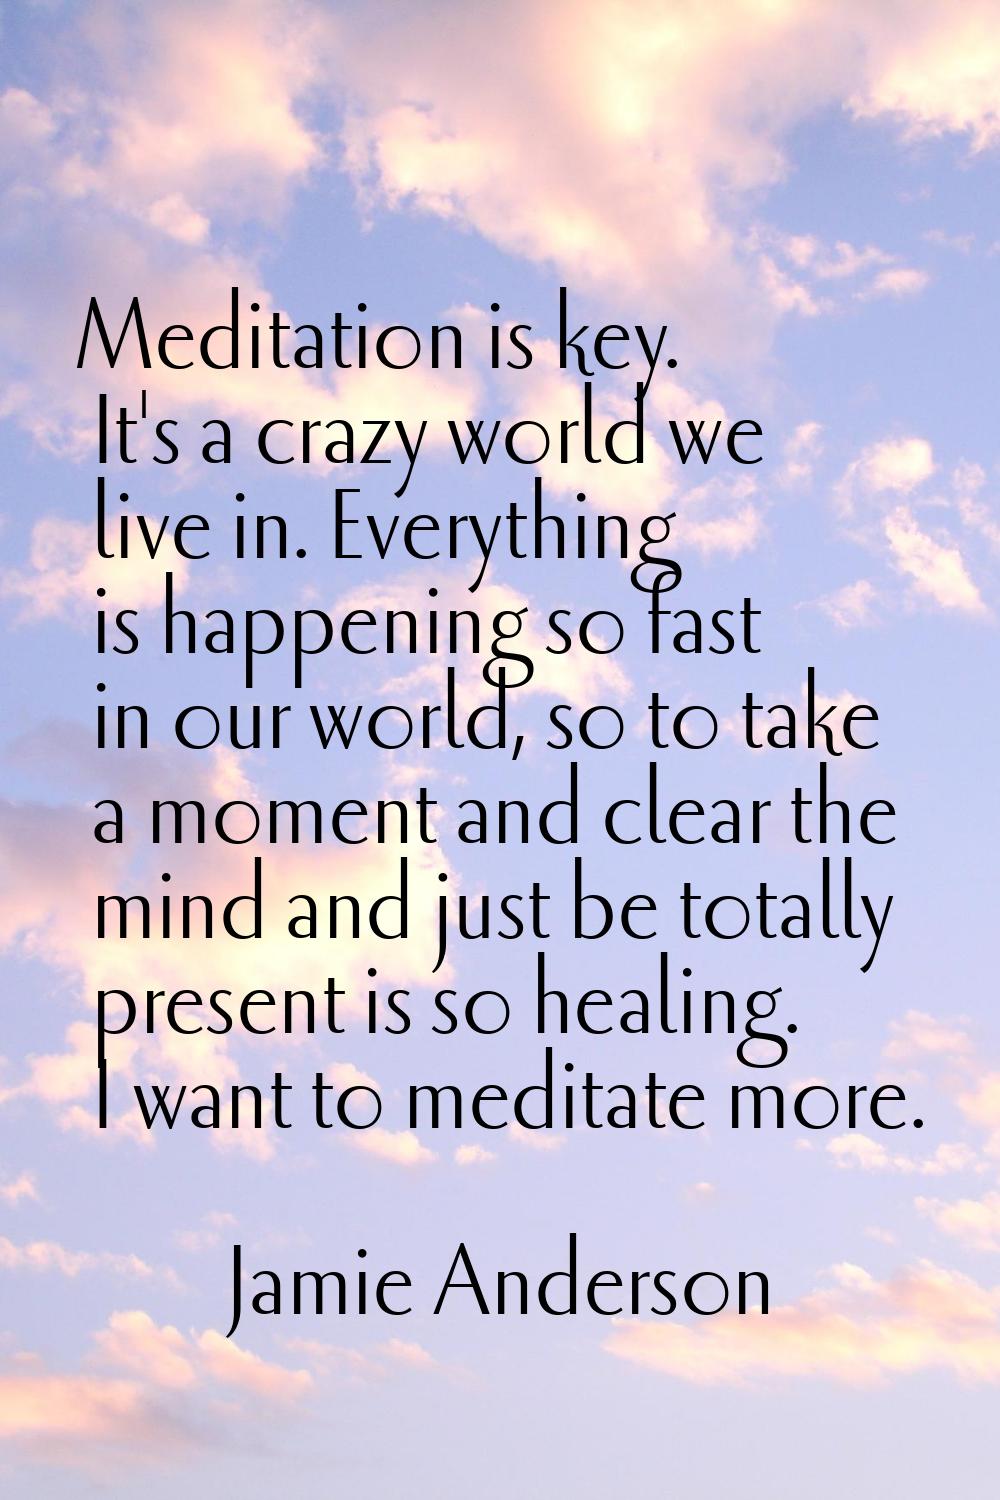 Meditation is key. It's a crazy world we live in. Everything is happening so fast in our world, so 